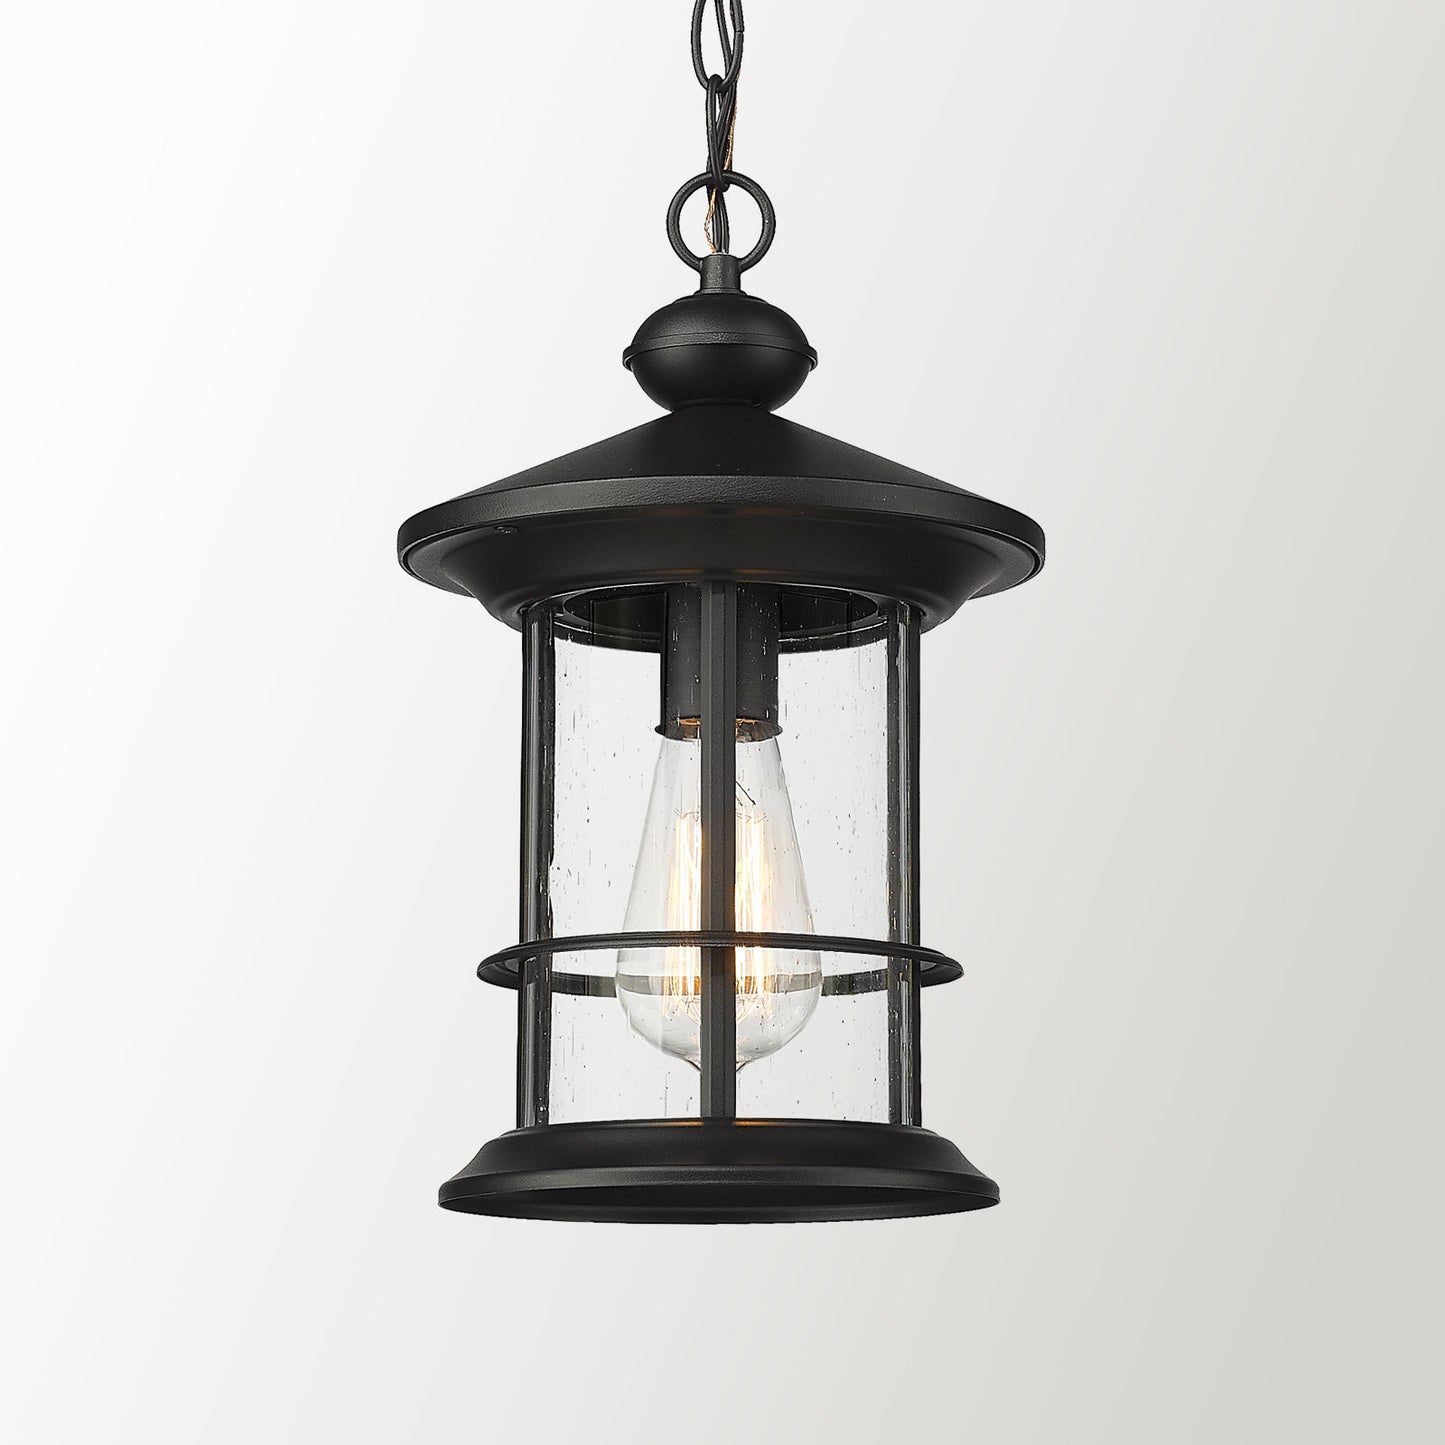 
                  
                    Emliviar Modern Industrial Outdoor Pendant Light for Porch, 13 Inch Exterior Hanging Light Fixture, Seeded Glass Shade in Black Finish, WE248H BK
                  
                